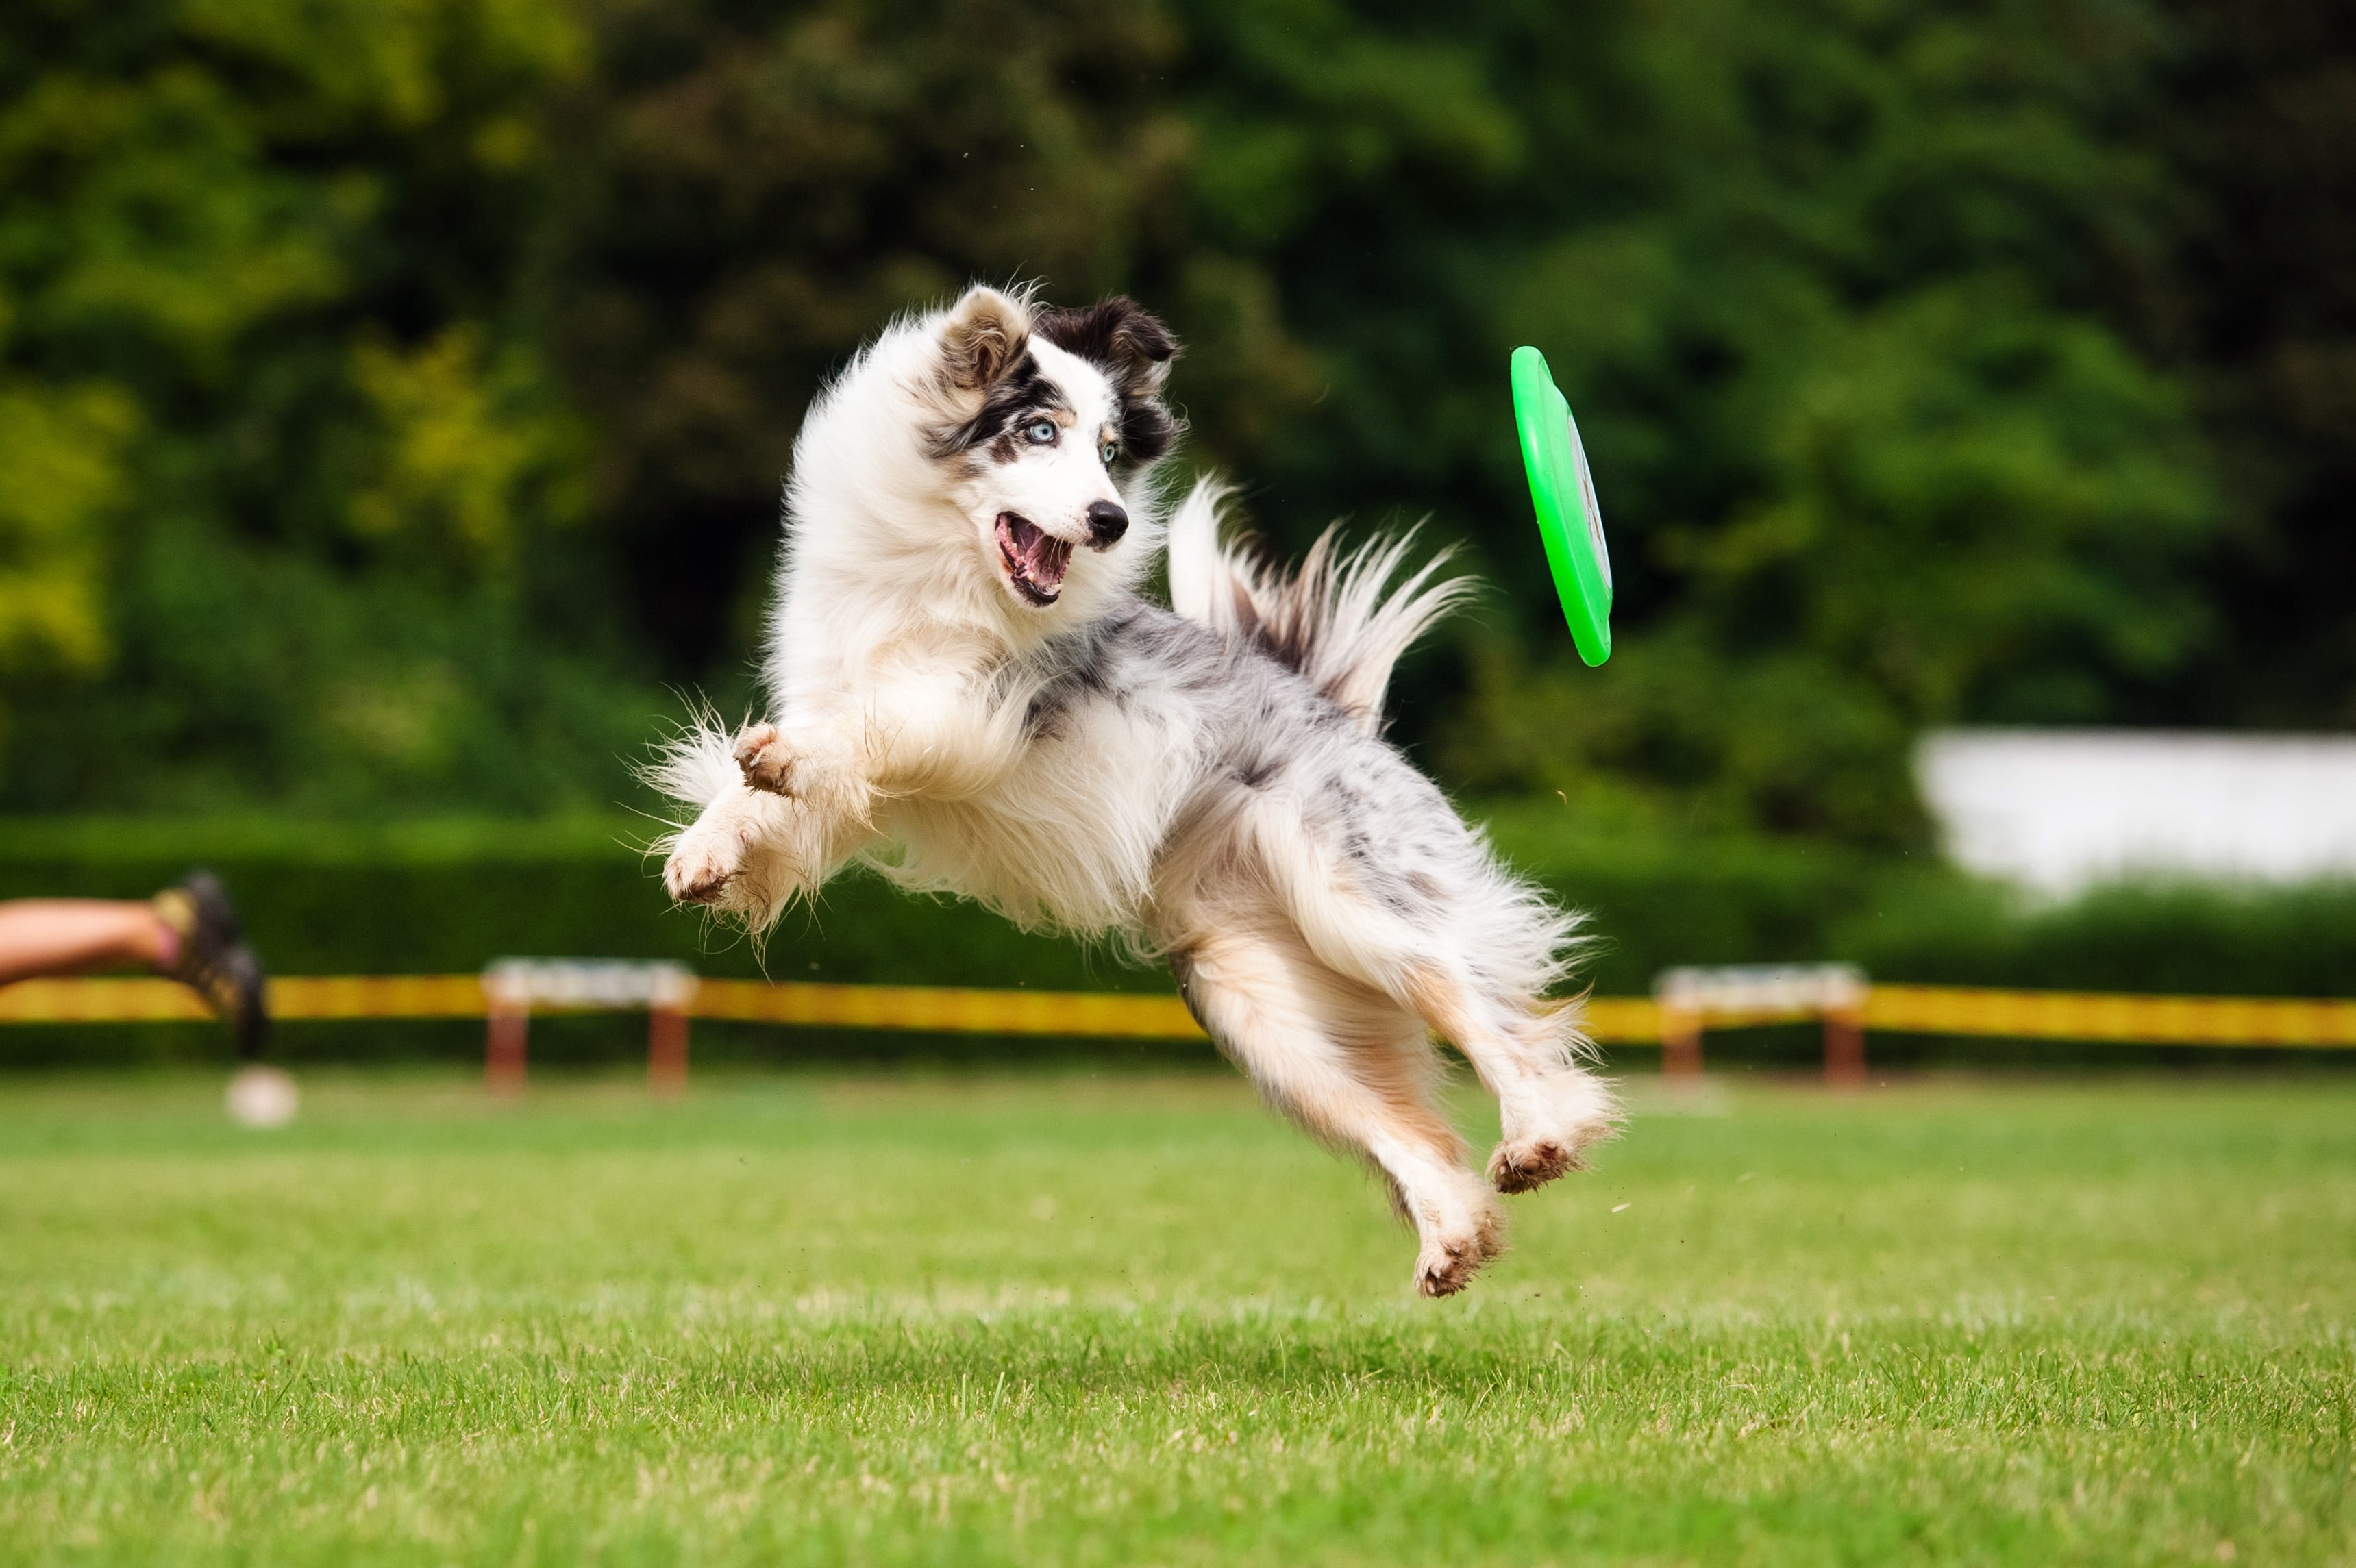 Dog playing with Frisbee